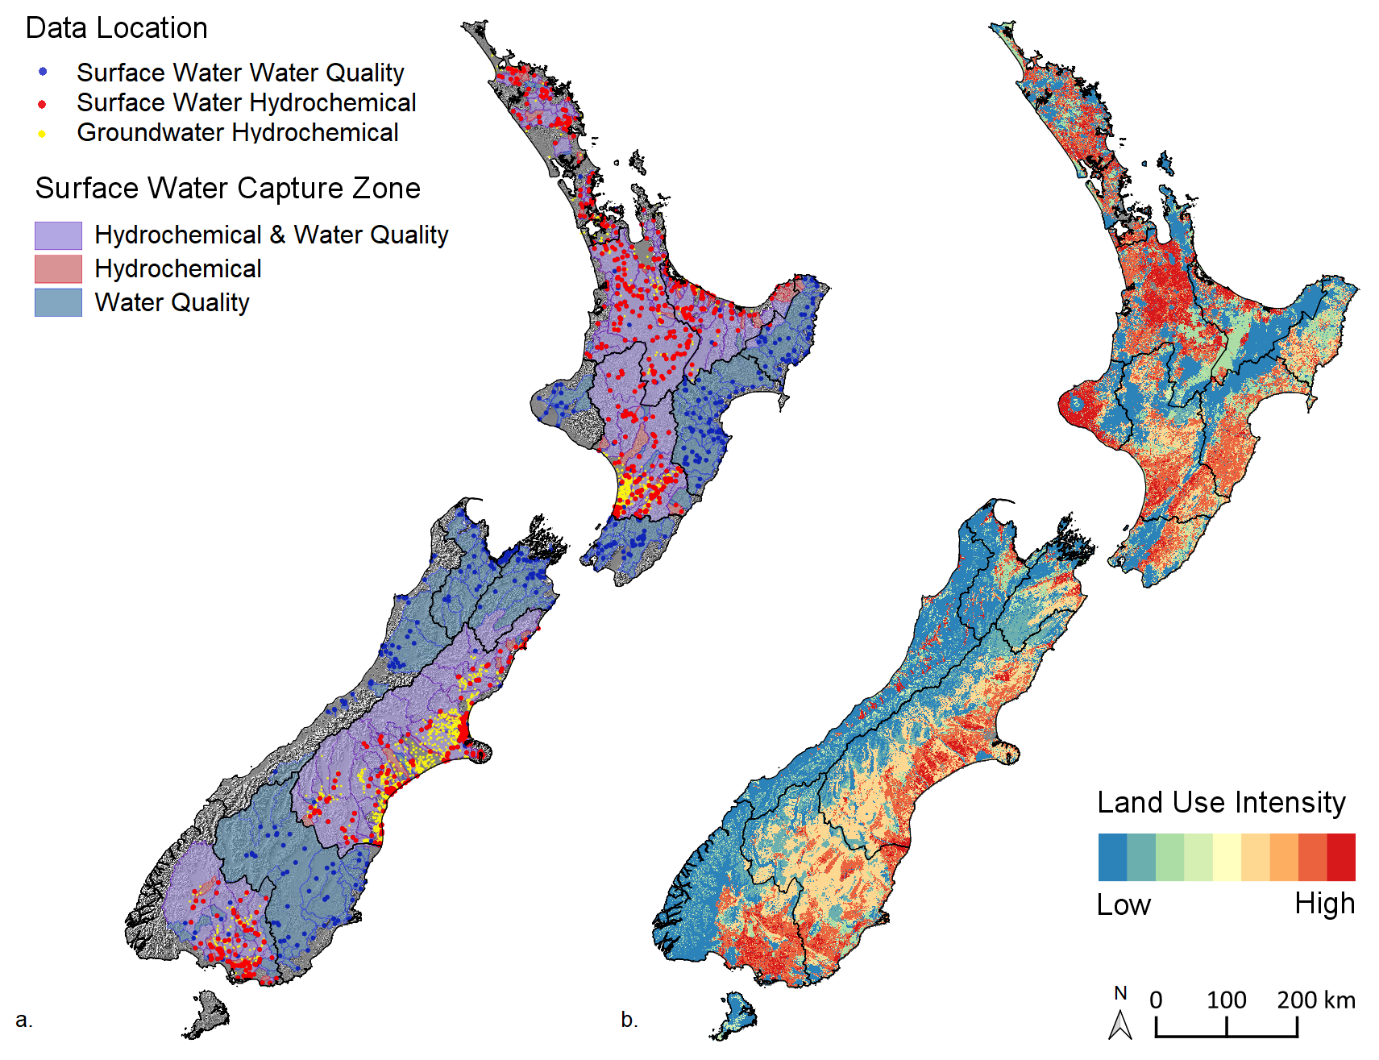 Two classification maps of New Zealand, one showing the three surface water capture zones (Hydrochemical, Water Quality, and Combined). The other map shows the land use intensity from Low to High.